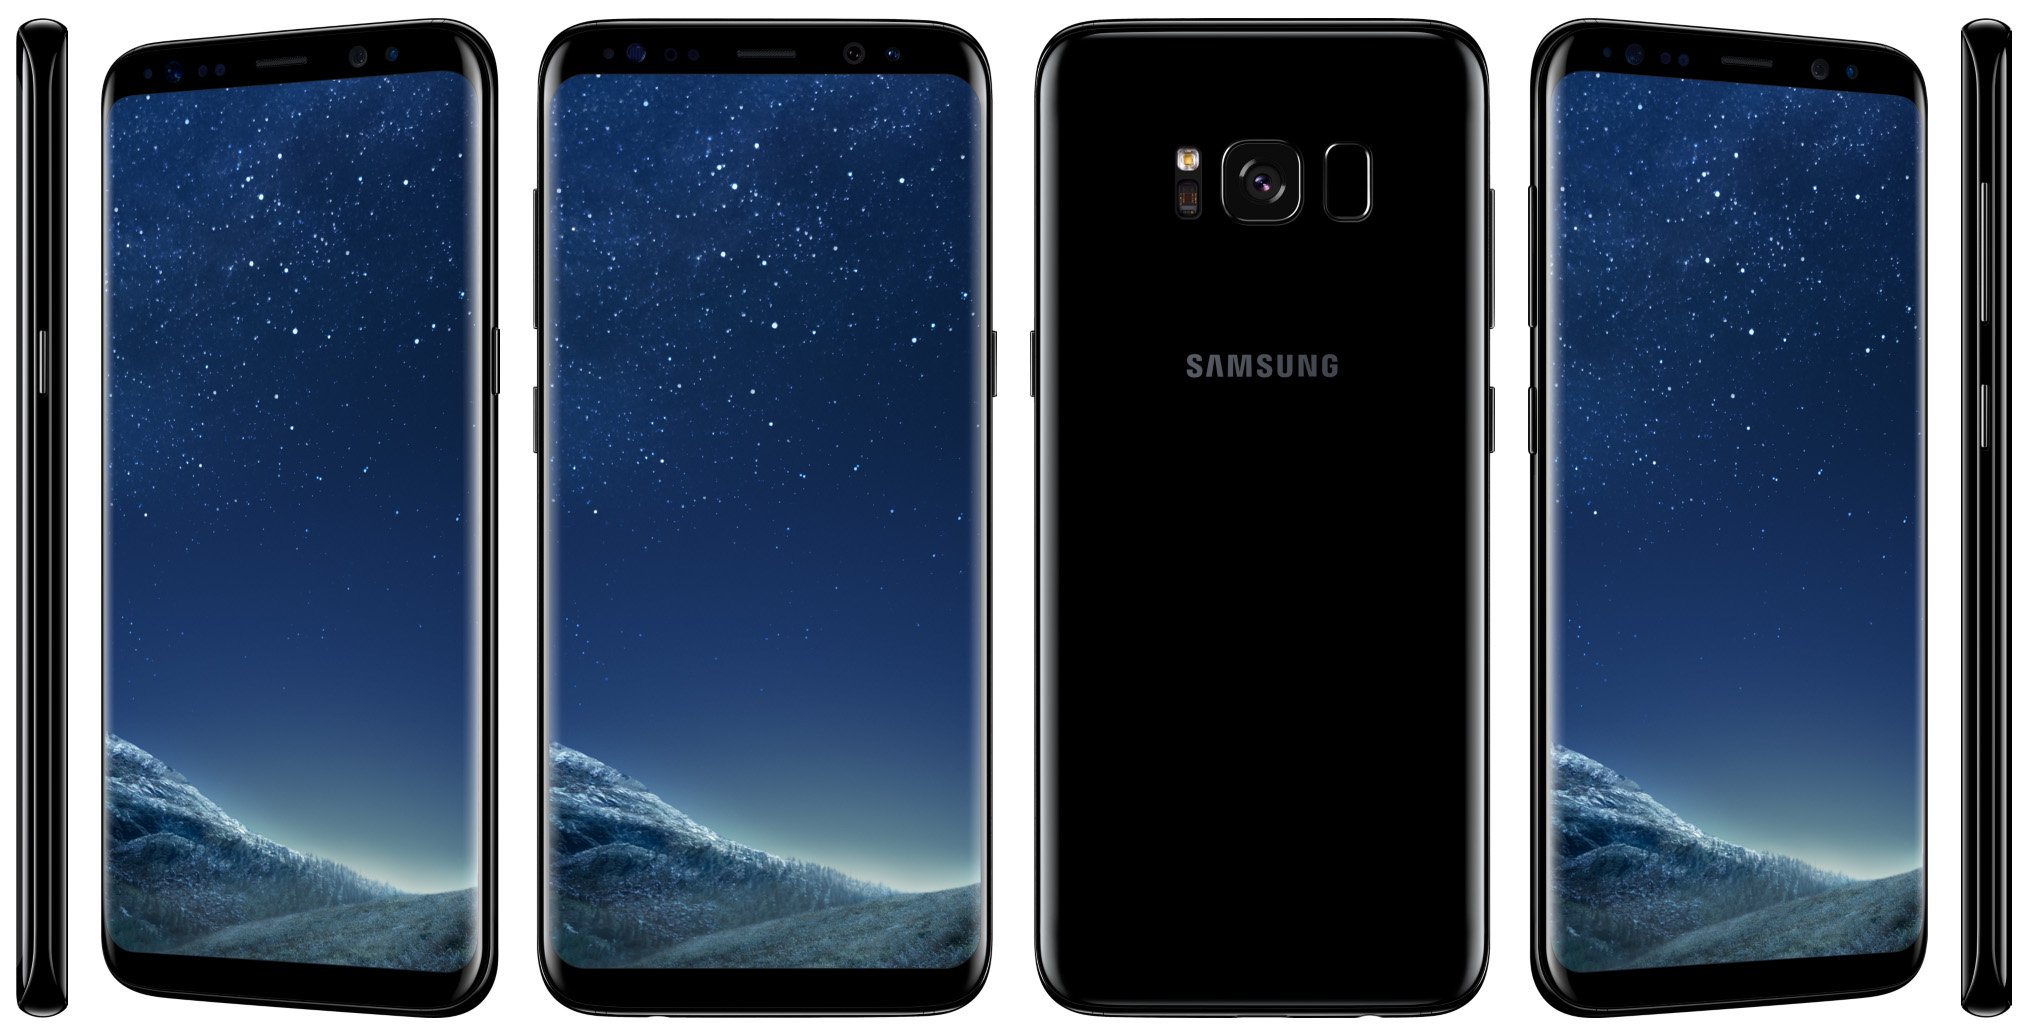 Samsung Galaxy S8 or iPhone 7 - which is better?